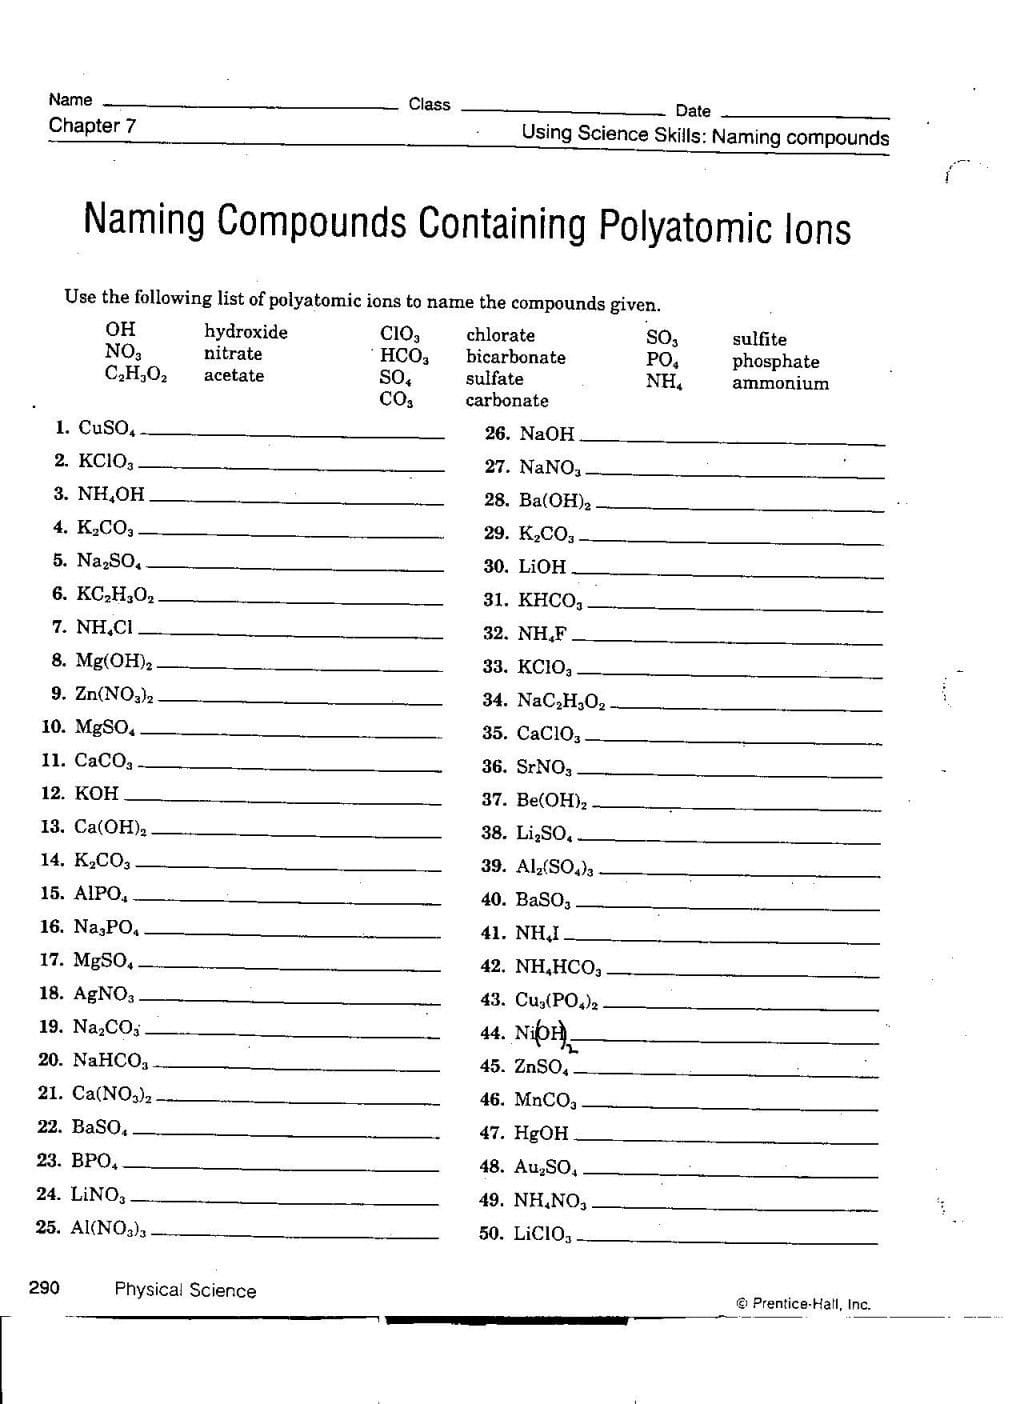 Naming Compounds Containing Polyatomic Ions Worksheet  Lobo Black As Well As Naming Compounds Containing Polyatomic Ions Worksheet